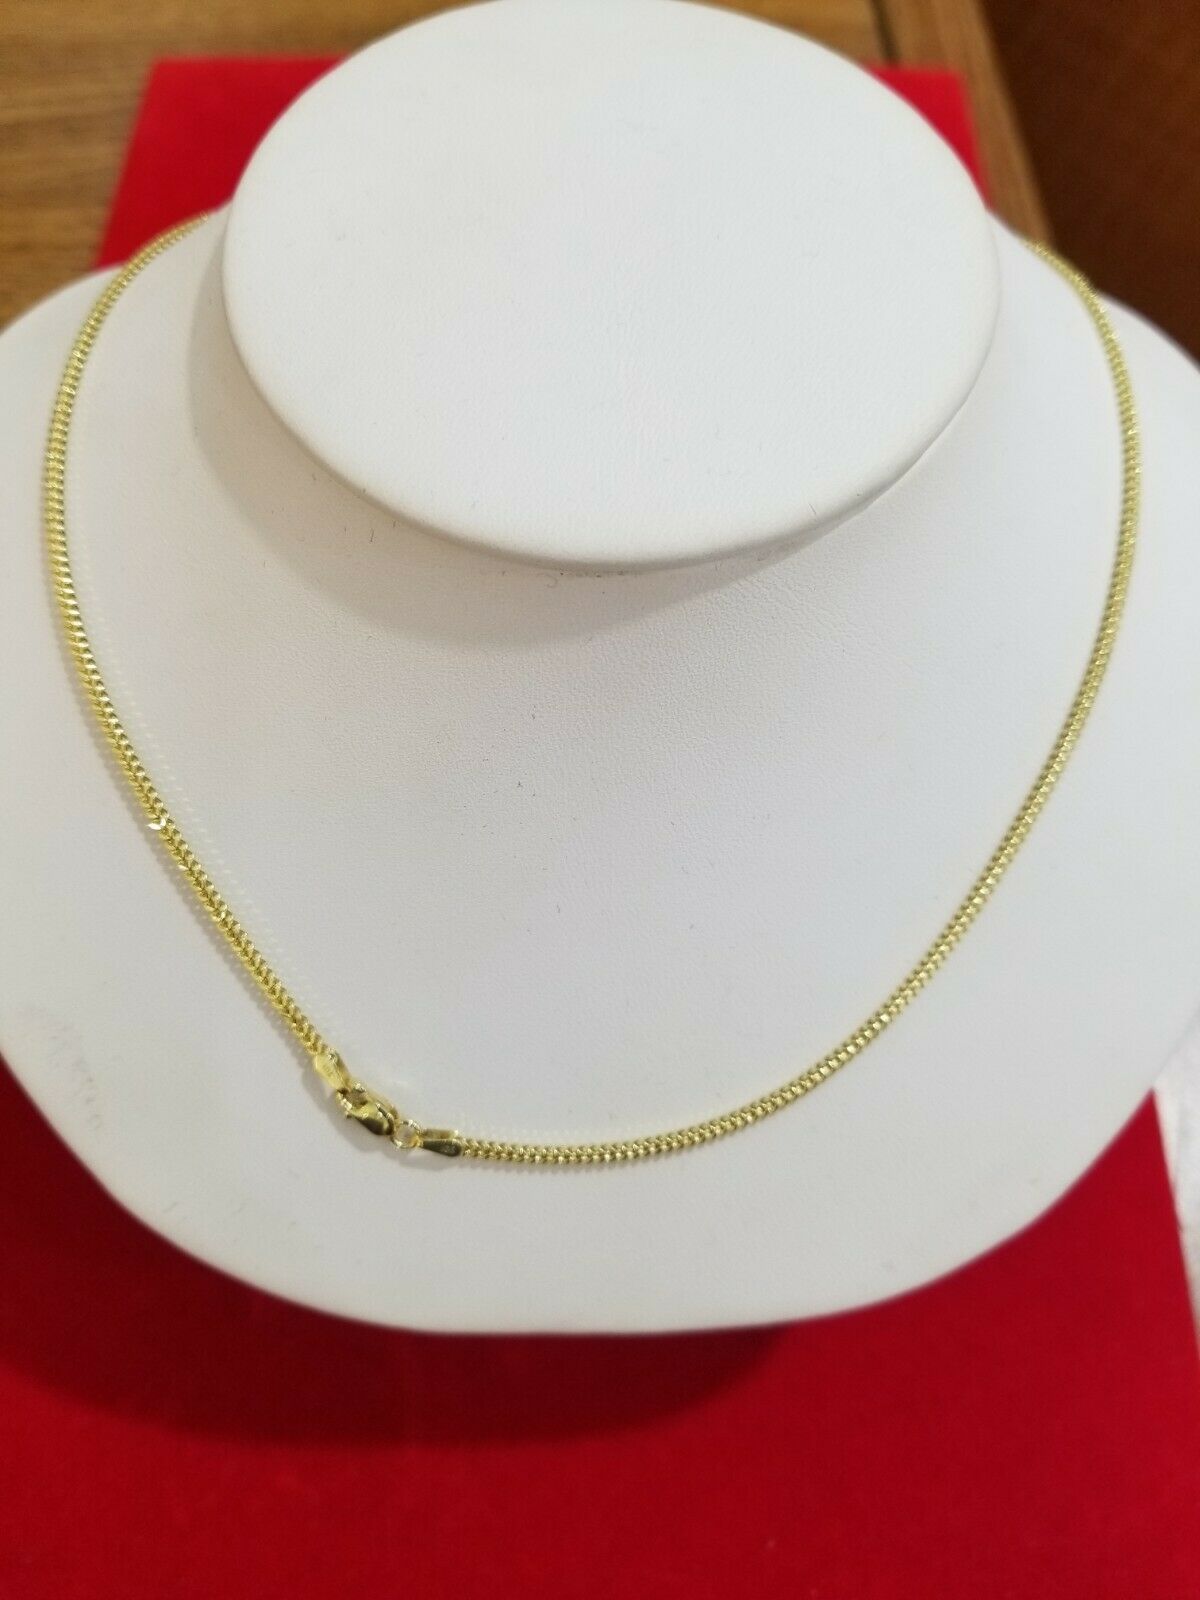 Ladies 10k Yellow Gold Necklace Franco Chain 16